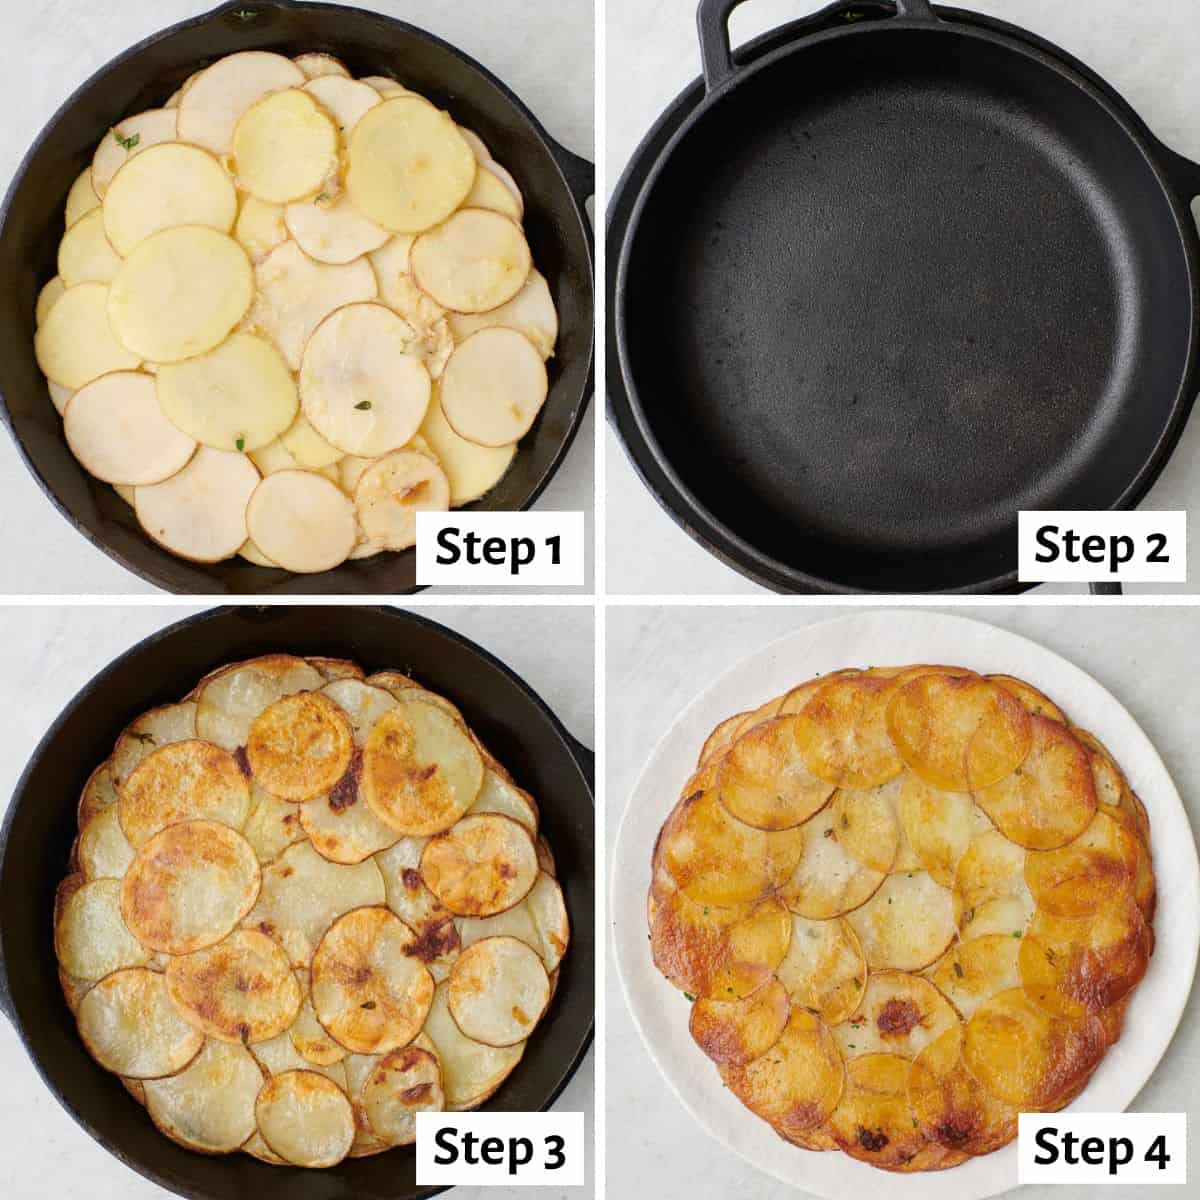 4 image collage assembly and baking recipe: roasted garlic coated potato slices arranged in a cast iron skillet, 2- another heavy skillet pressing the potatoes down before baking, 3- pan removed to show potatoes after baking, 4- recipe flipped out of pan on a serving plate to show golden brown and crispy potato slices.